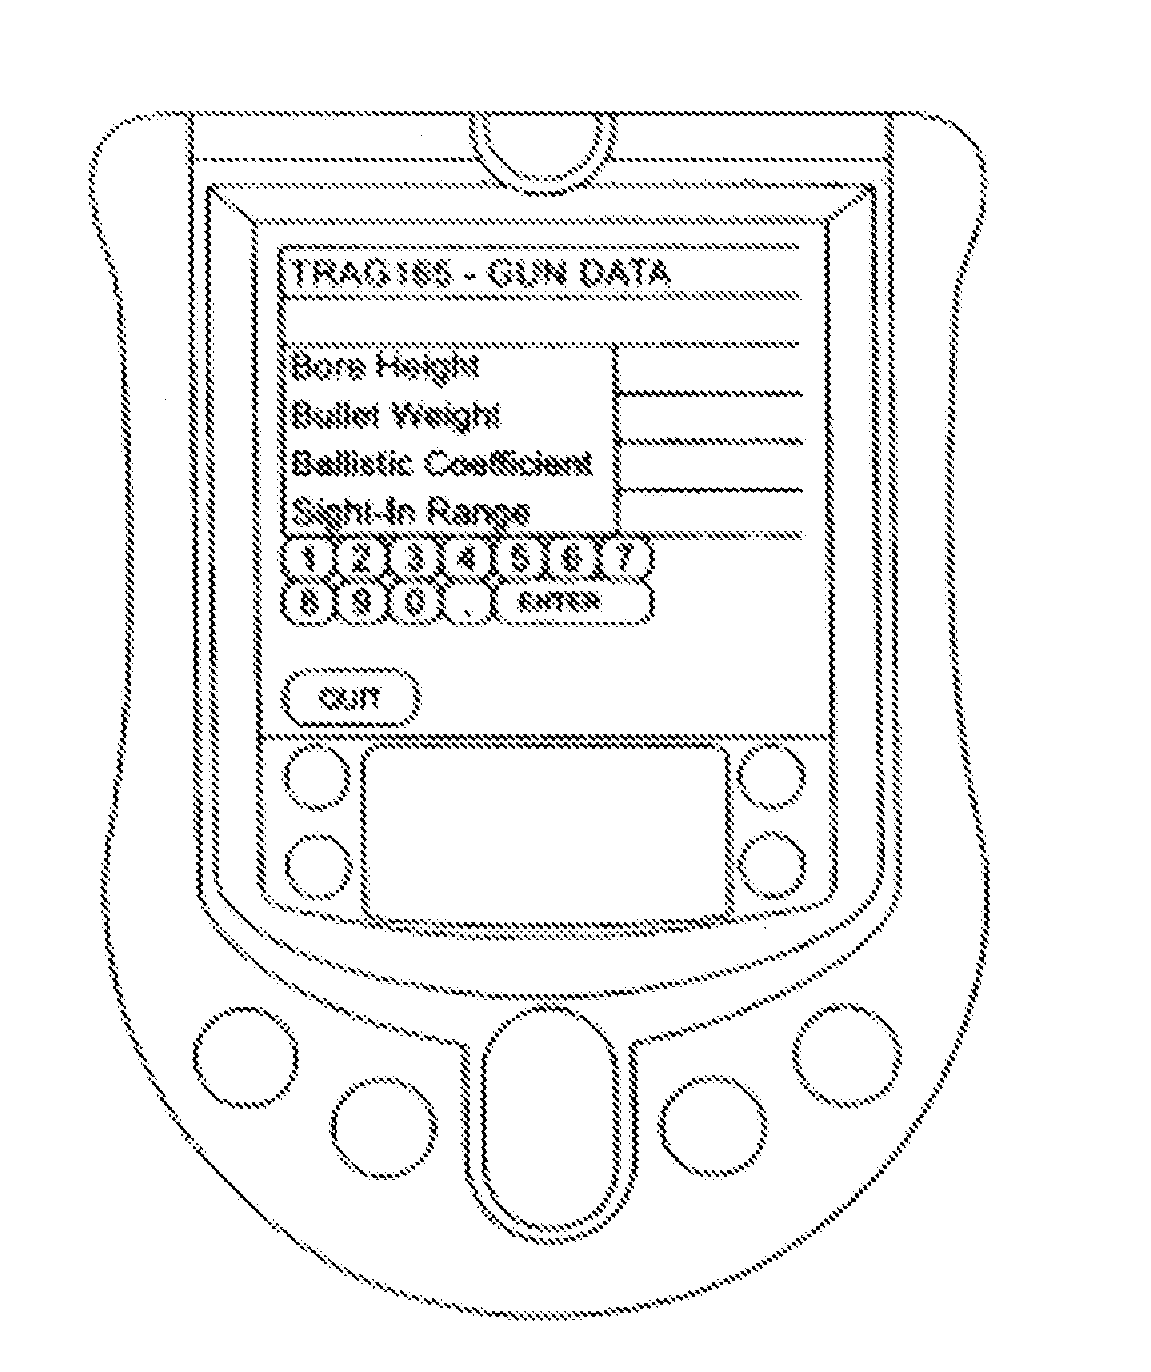 Compositions, methods and systems for external and internal environmental sensing